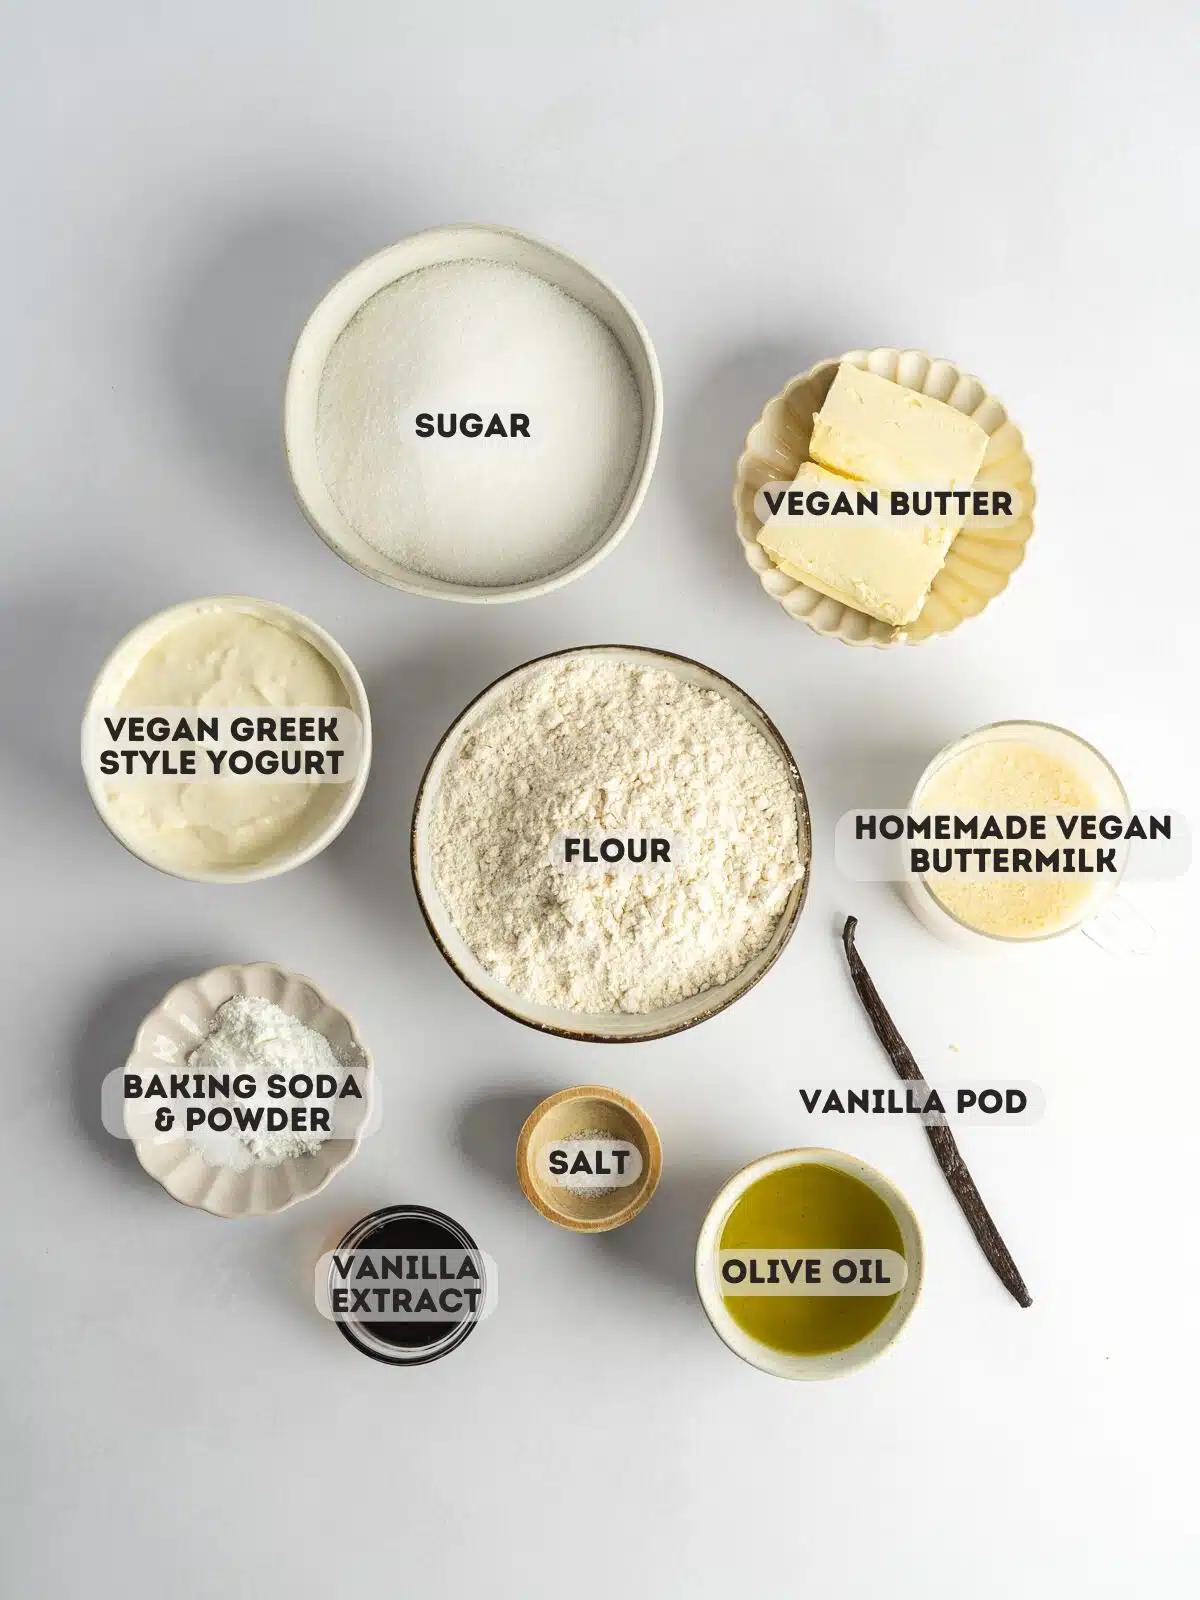 ingredients to make vegan vanilla cake measured out in bowls on a light gray surface with text overlay.